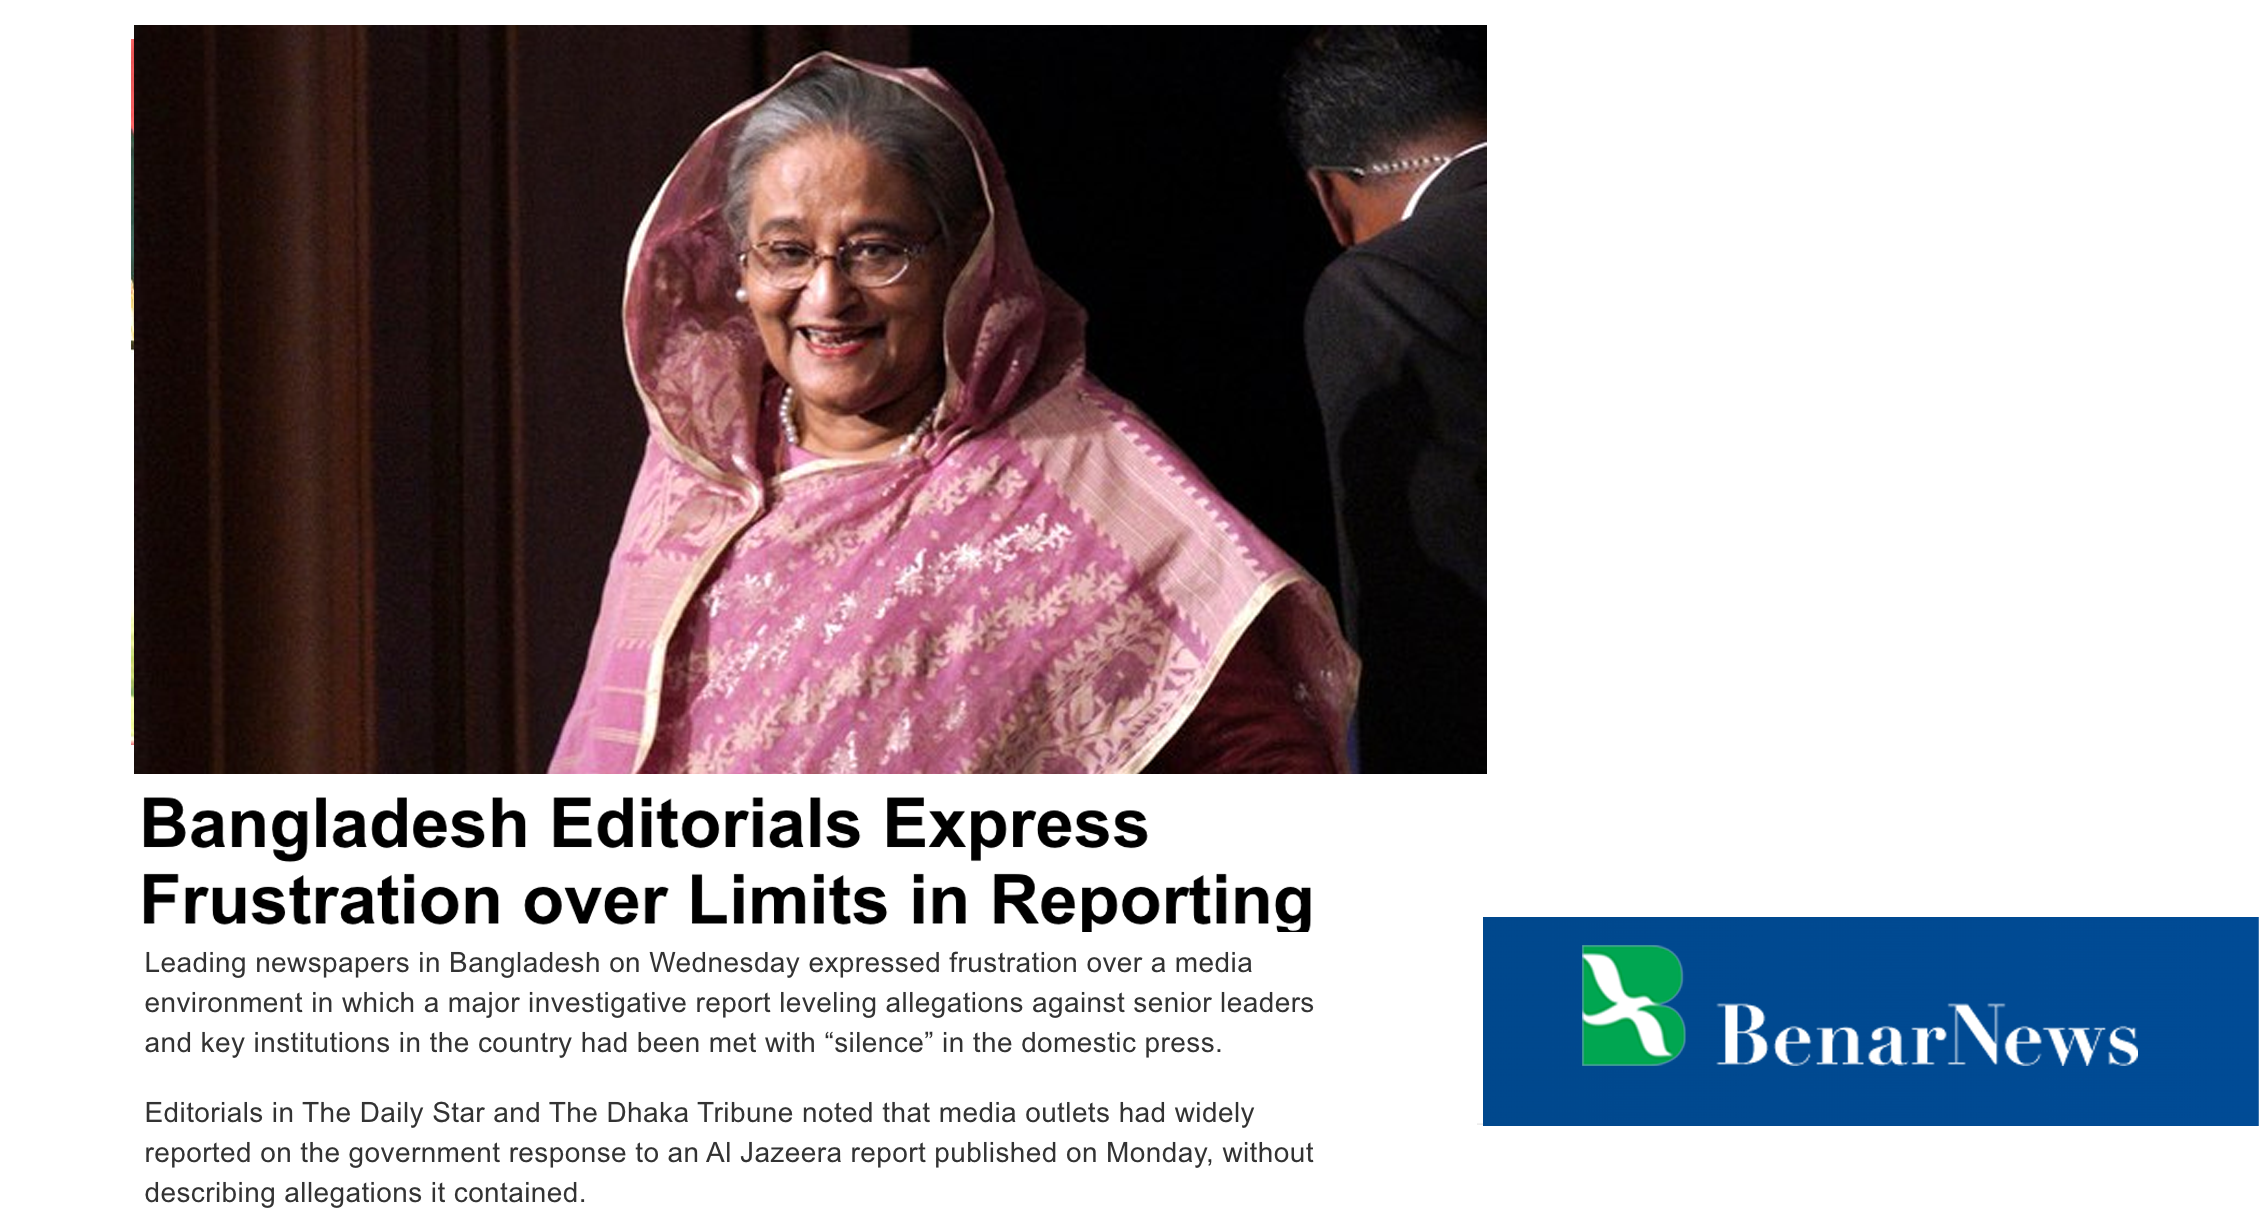 Bangladesh Editorials Express Frustration over Limits in Reporting